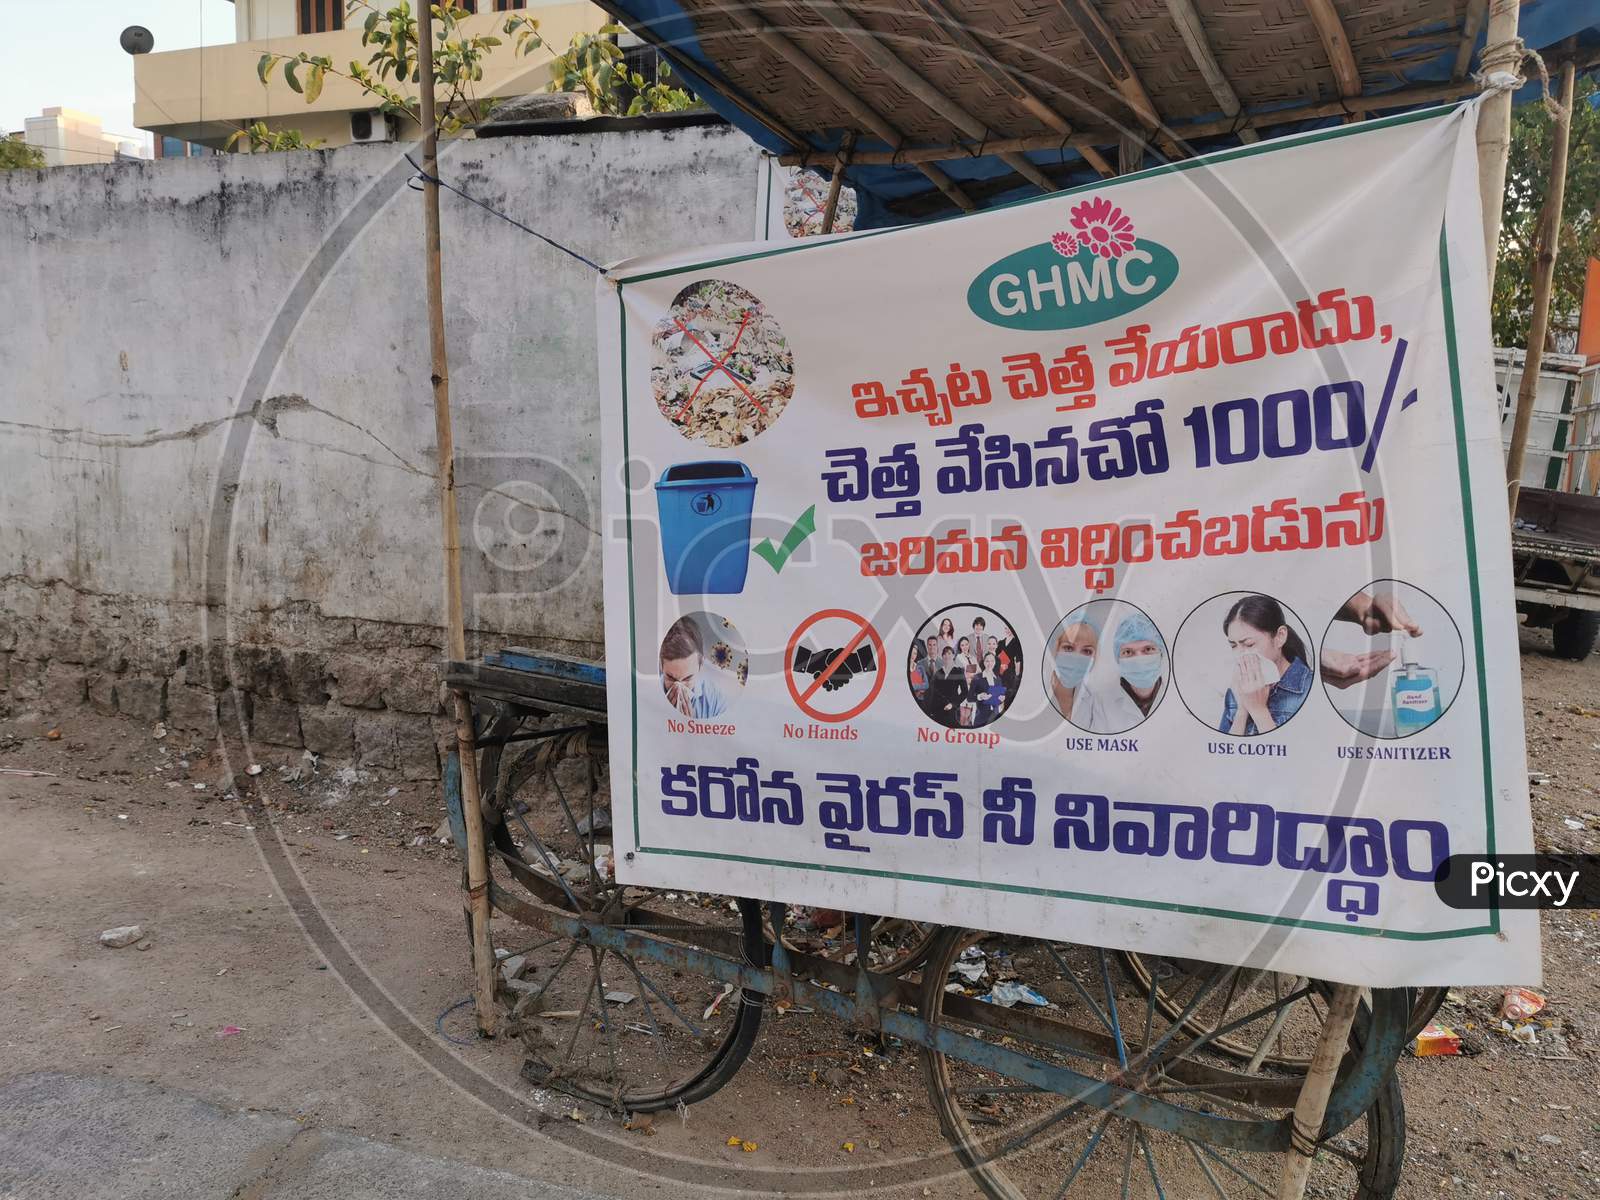 No Dumping Warning Banner by GHMC